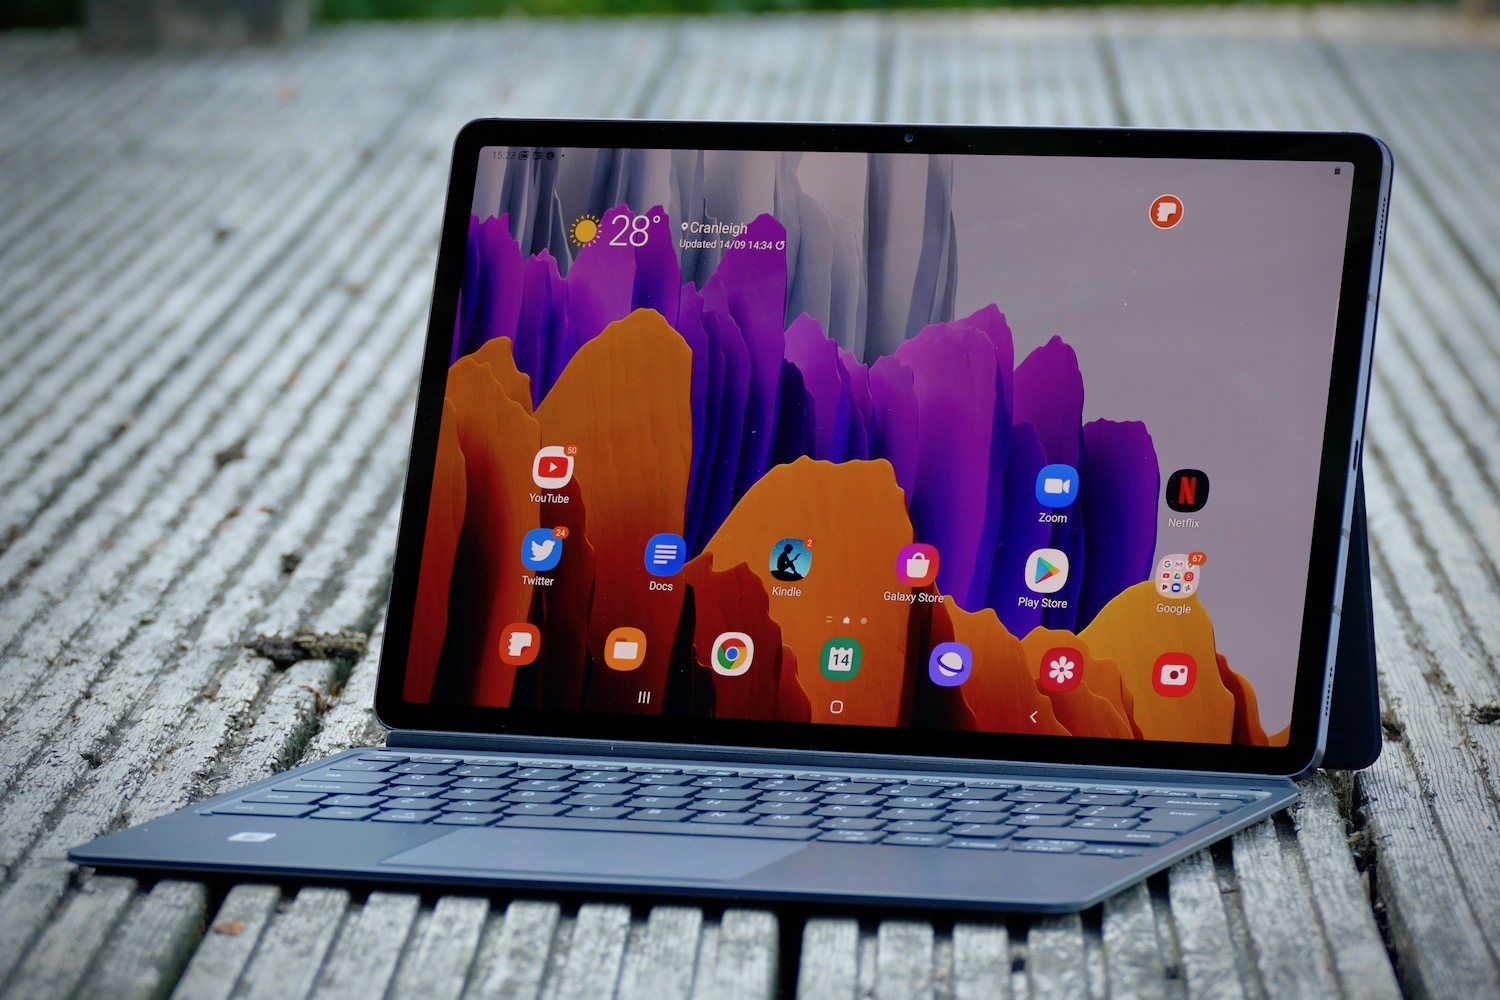 Samsung Galaxy Tab S7 Plus Review: Awesome Tablet For Video | Digital Trends